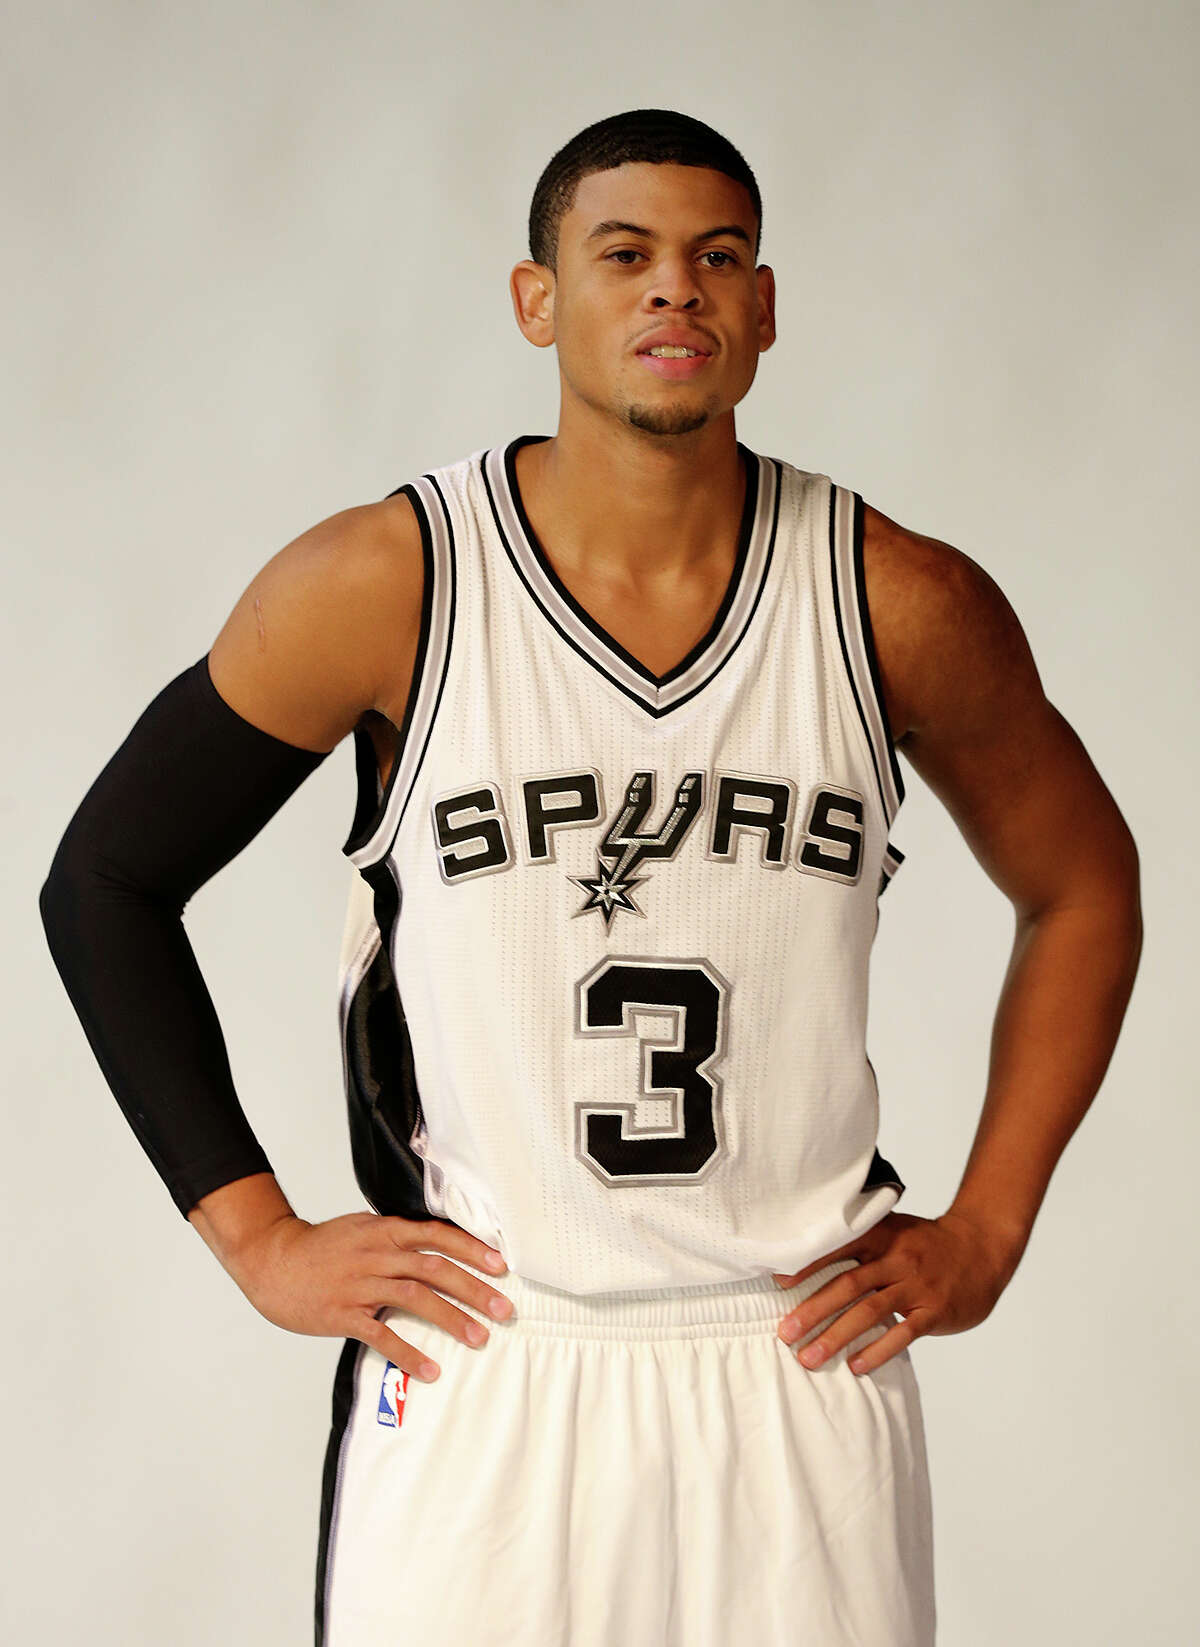 San Antonio Spurs Ray McCallum is photographed during Media Day at their training facilities, Monday, Sept. 28, 2015.